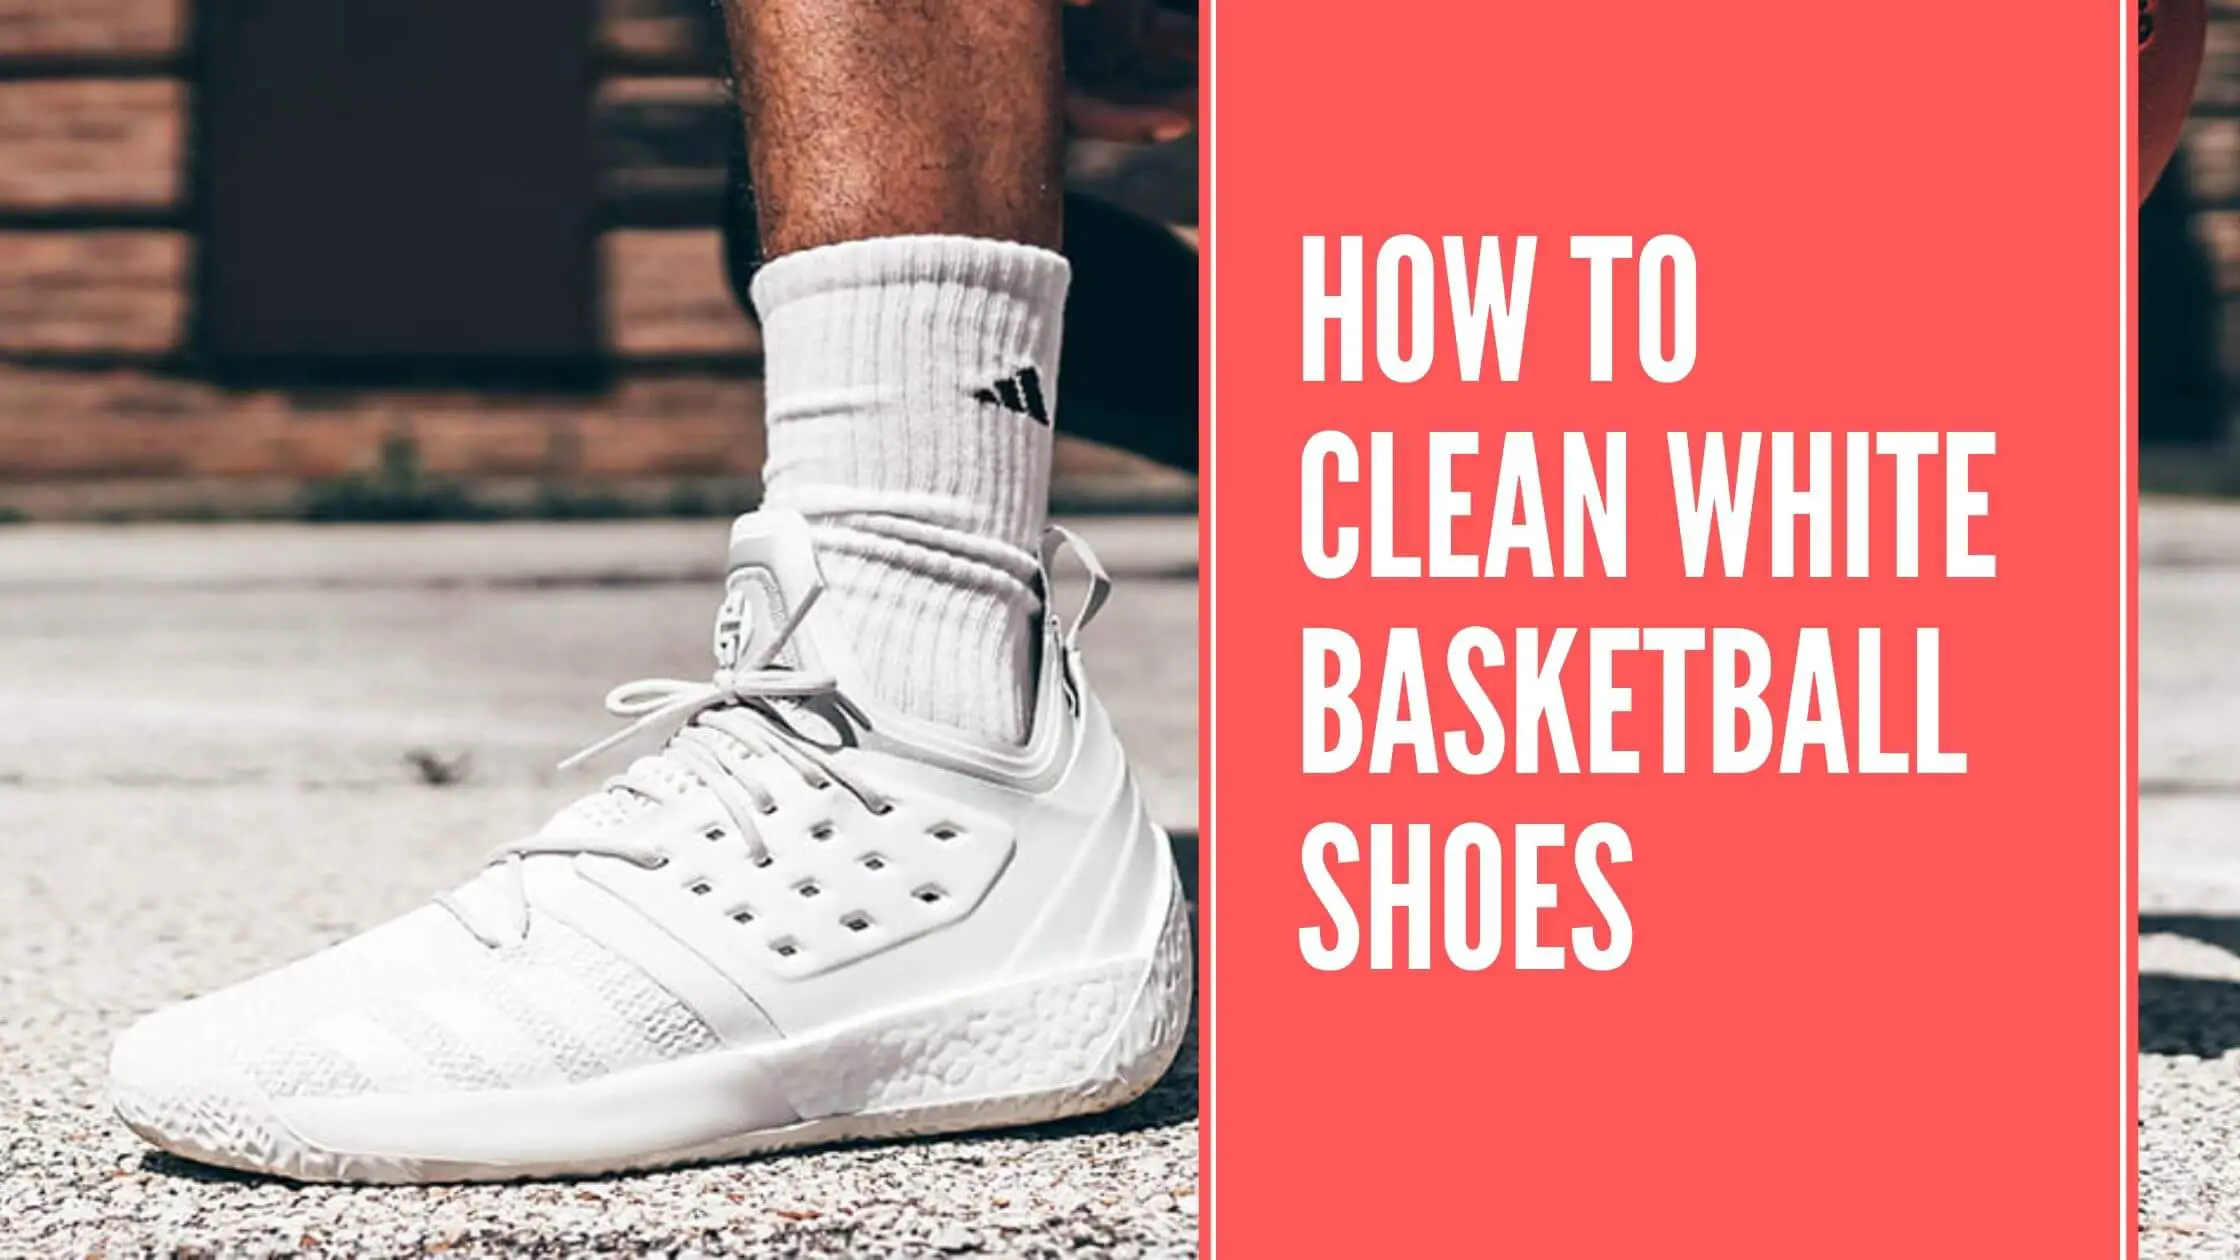 How to Clean White Basketball Shoes